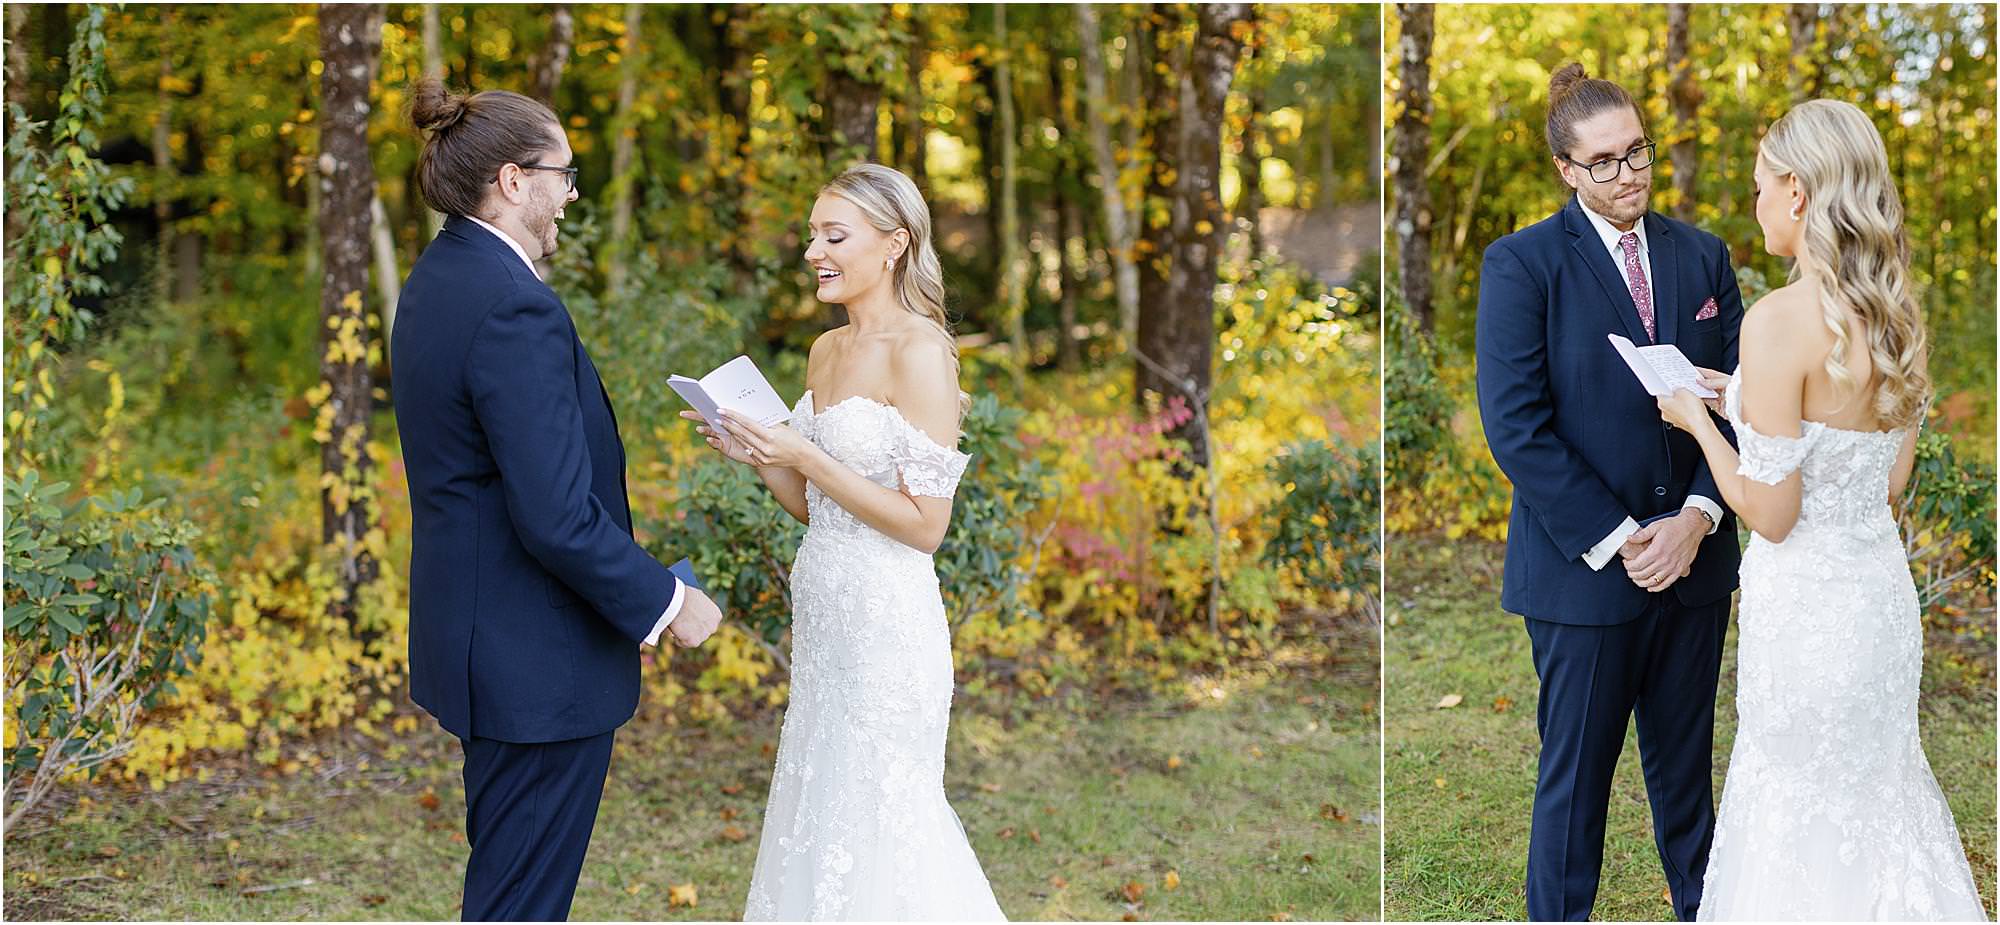 Couple reading each other private vows before their wedding ceremony at their first look